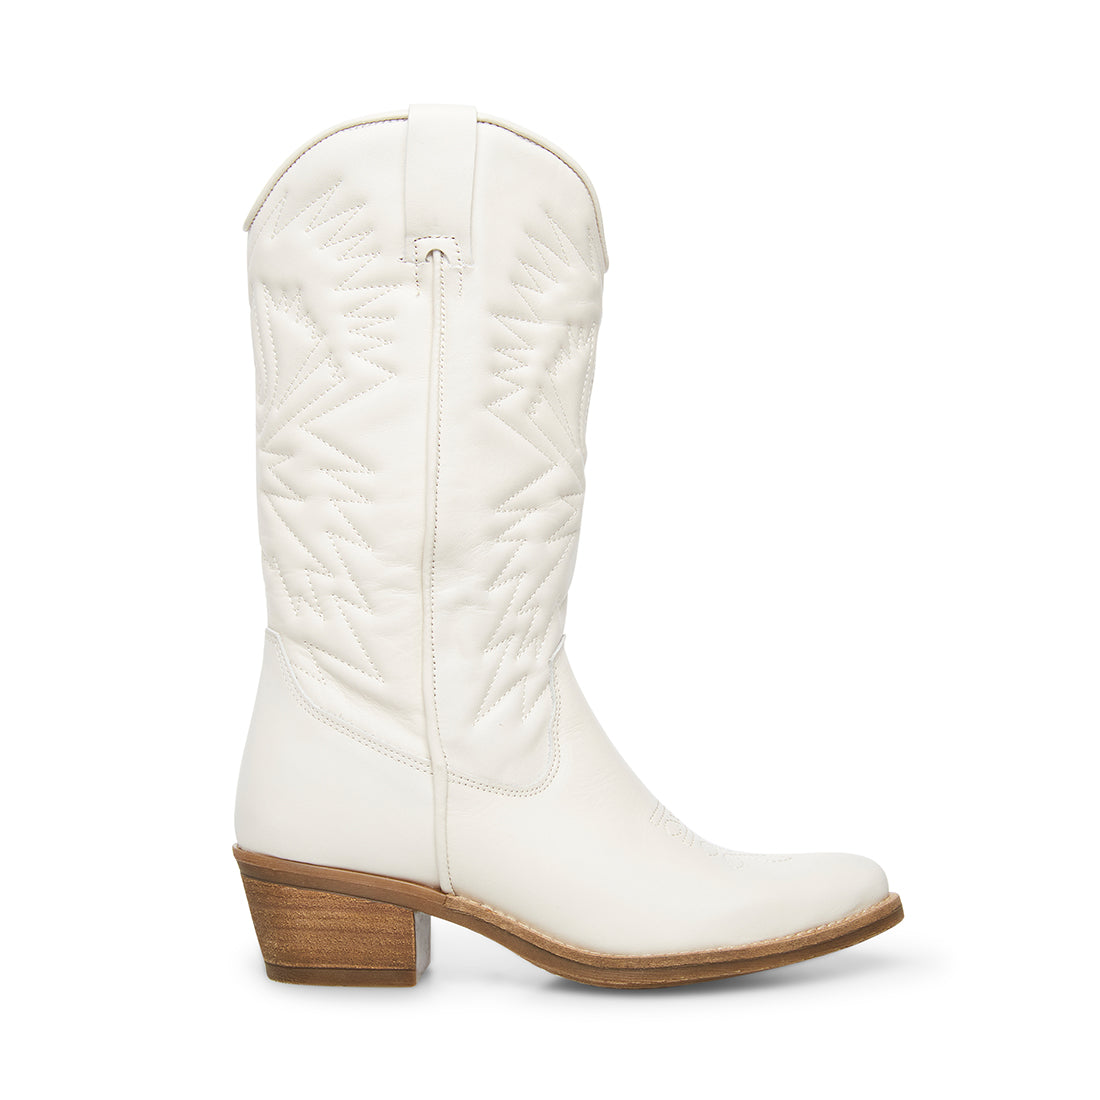 Cowgirl Boots - Women's Cowboy Boots